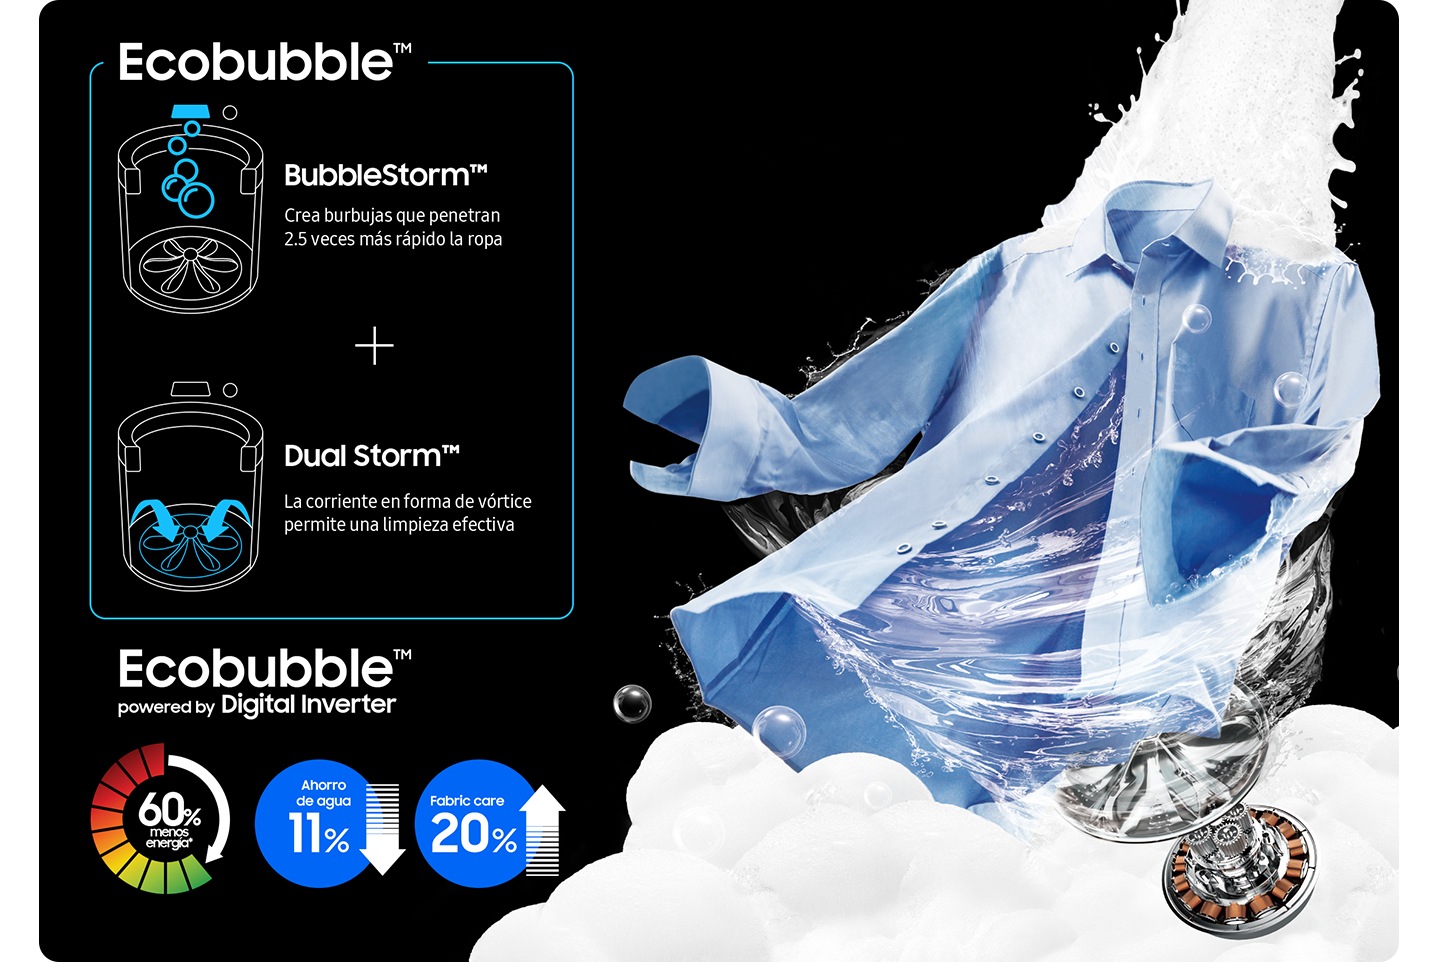 A strong stream of water, foam, and a Digital Inverter Technology motor are washing a blue shirt. Bubblestorm™ creates rich bubbles to penetrate fabric 2.5x faster* and Dual Storm™ twists and rubs items to enable effective cleaning. Ecobubble™ powered by Digital Inverter, saves 60% of energy, 14% of water and cares better 20% of fabric.